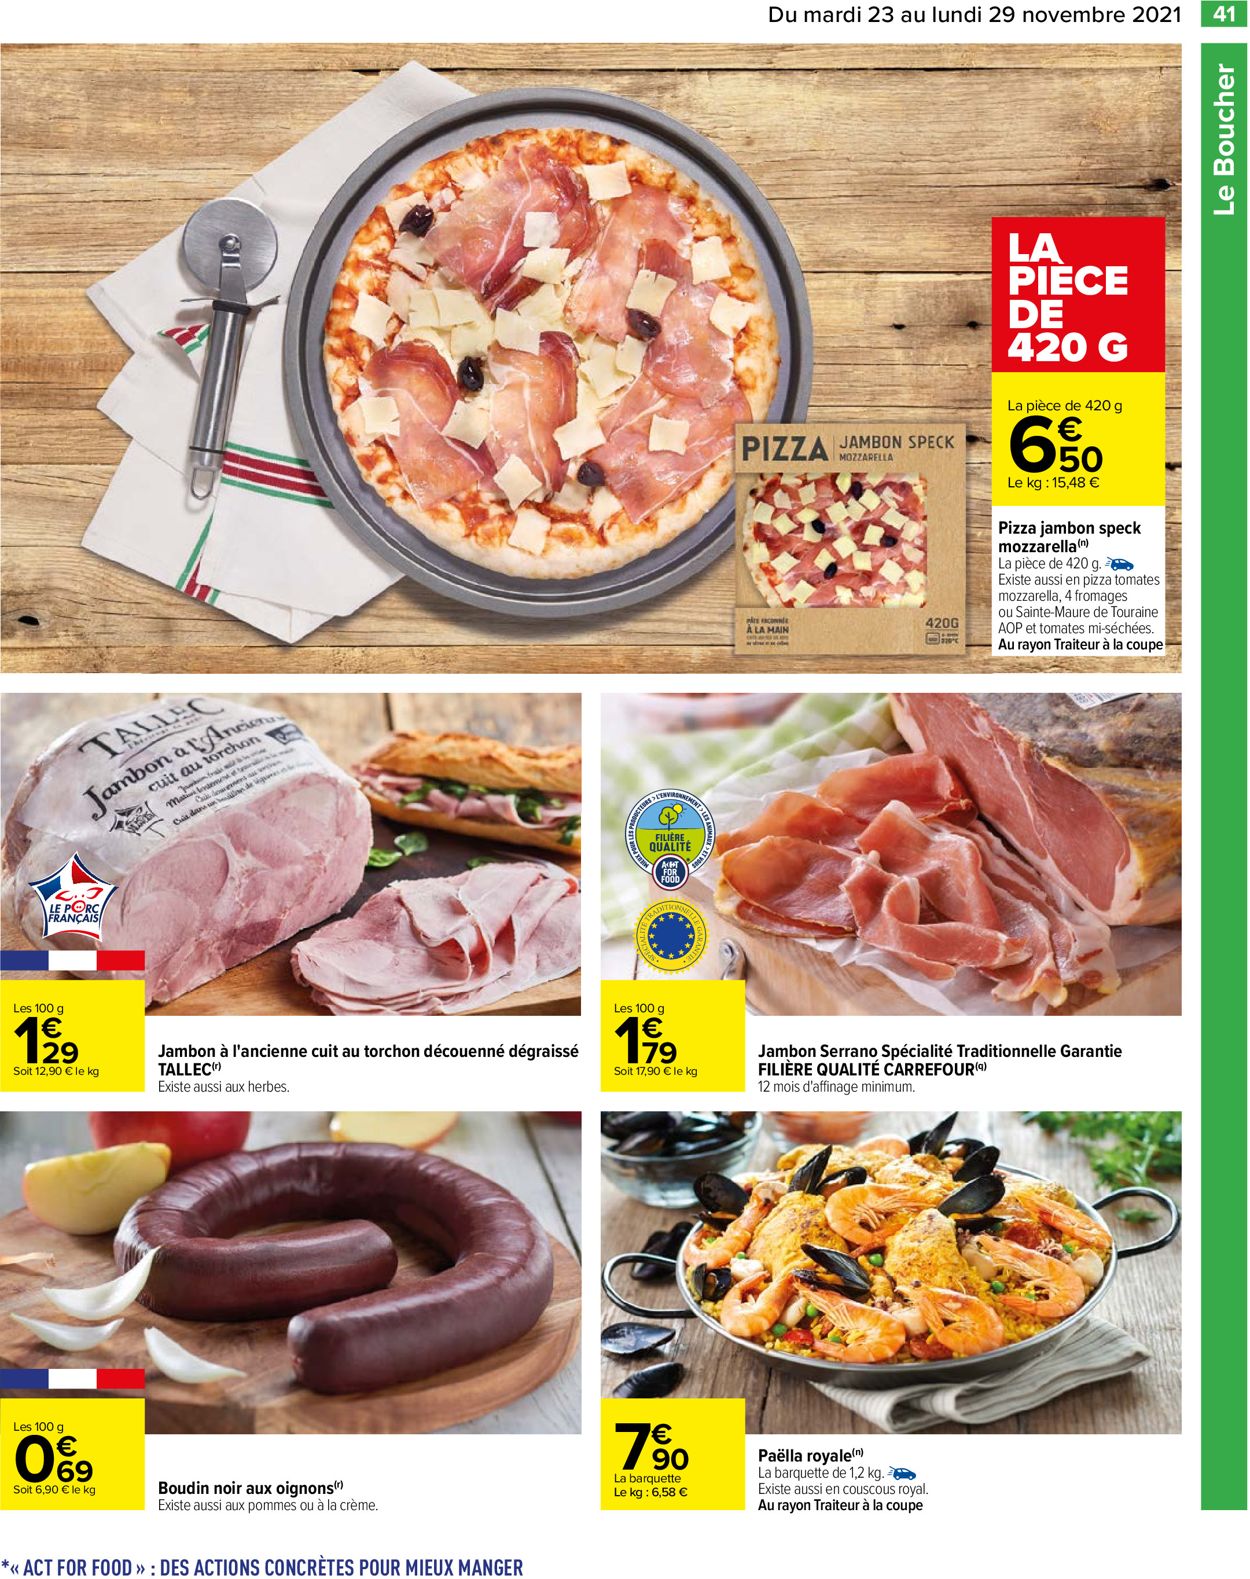 Carrefour BLACK WEEK 2021 Catalogue - 23.11-29.11.2021 (Page 41)